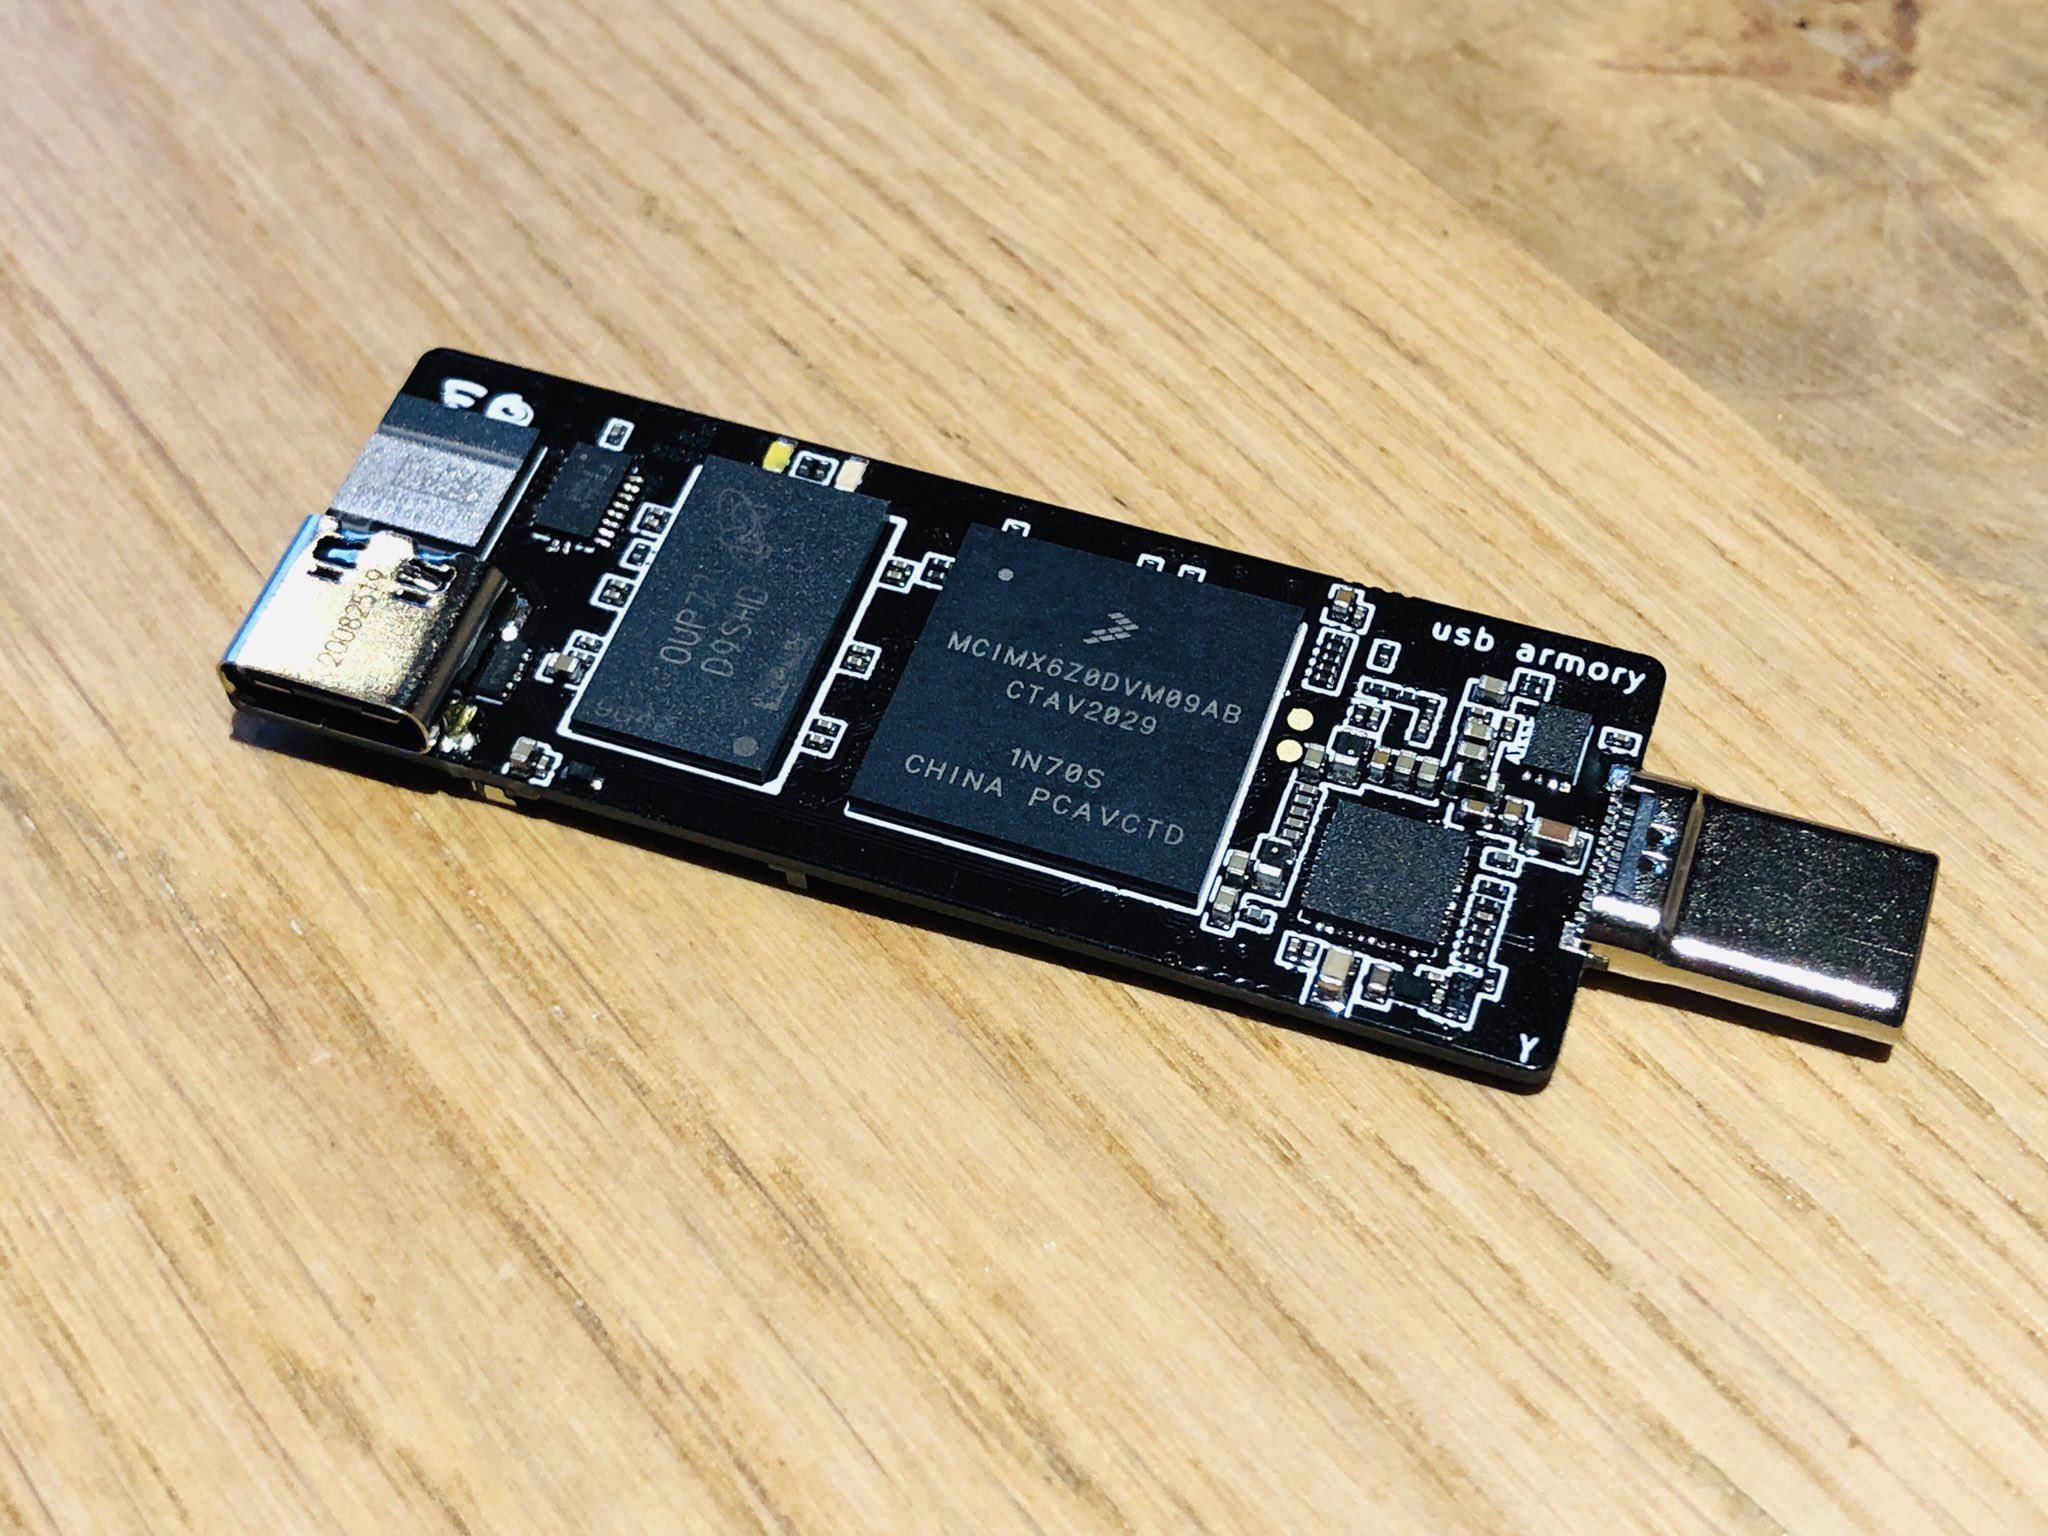 Andrea Barisani on Twitter: "The USB armory rev. γ (gamma) just arrived for testing! * Common Criteria EAL 6+ NXP SE050 secure element * Ultra High SD/MMc * More robust Type-C